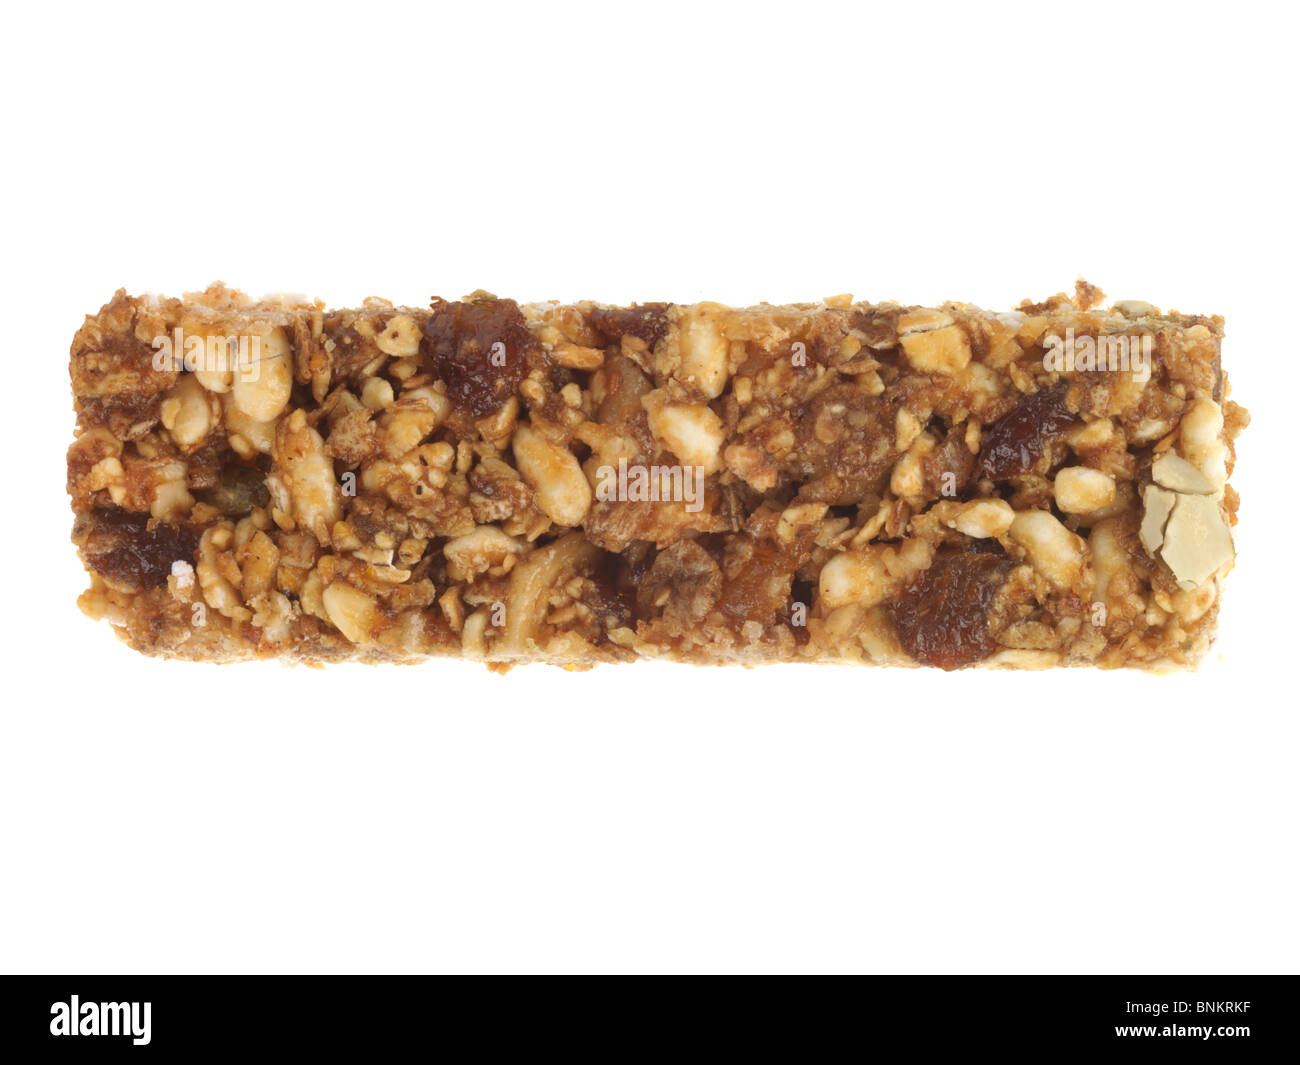 Fruit and Nut Cereal Bar Stock Photo